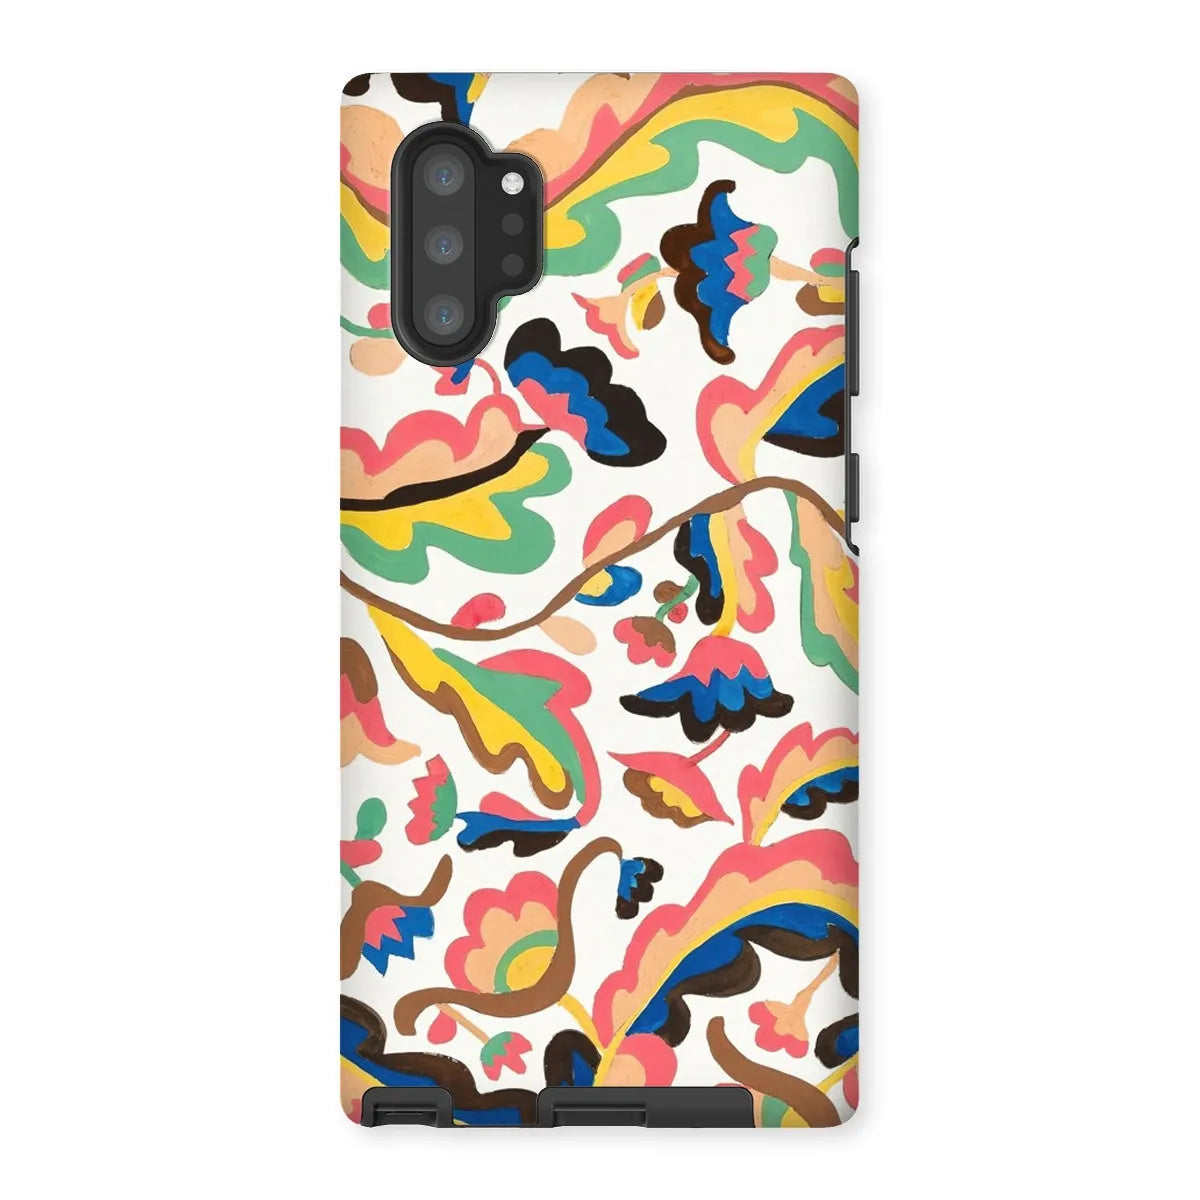 Colcha Floral Aesthetic Pattern Phone Case - Etna Wiswall - Samsung Galaxy Note 10p / Matte - Mobile Phone Cases